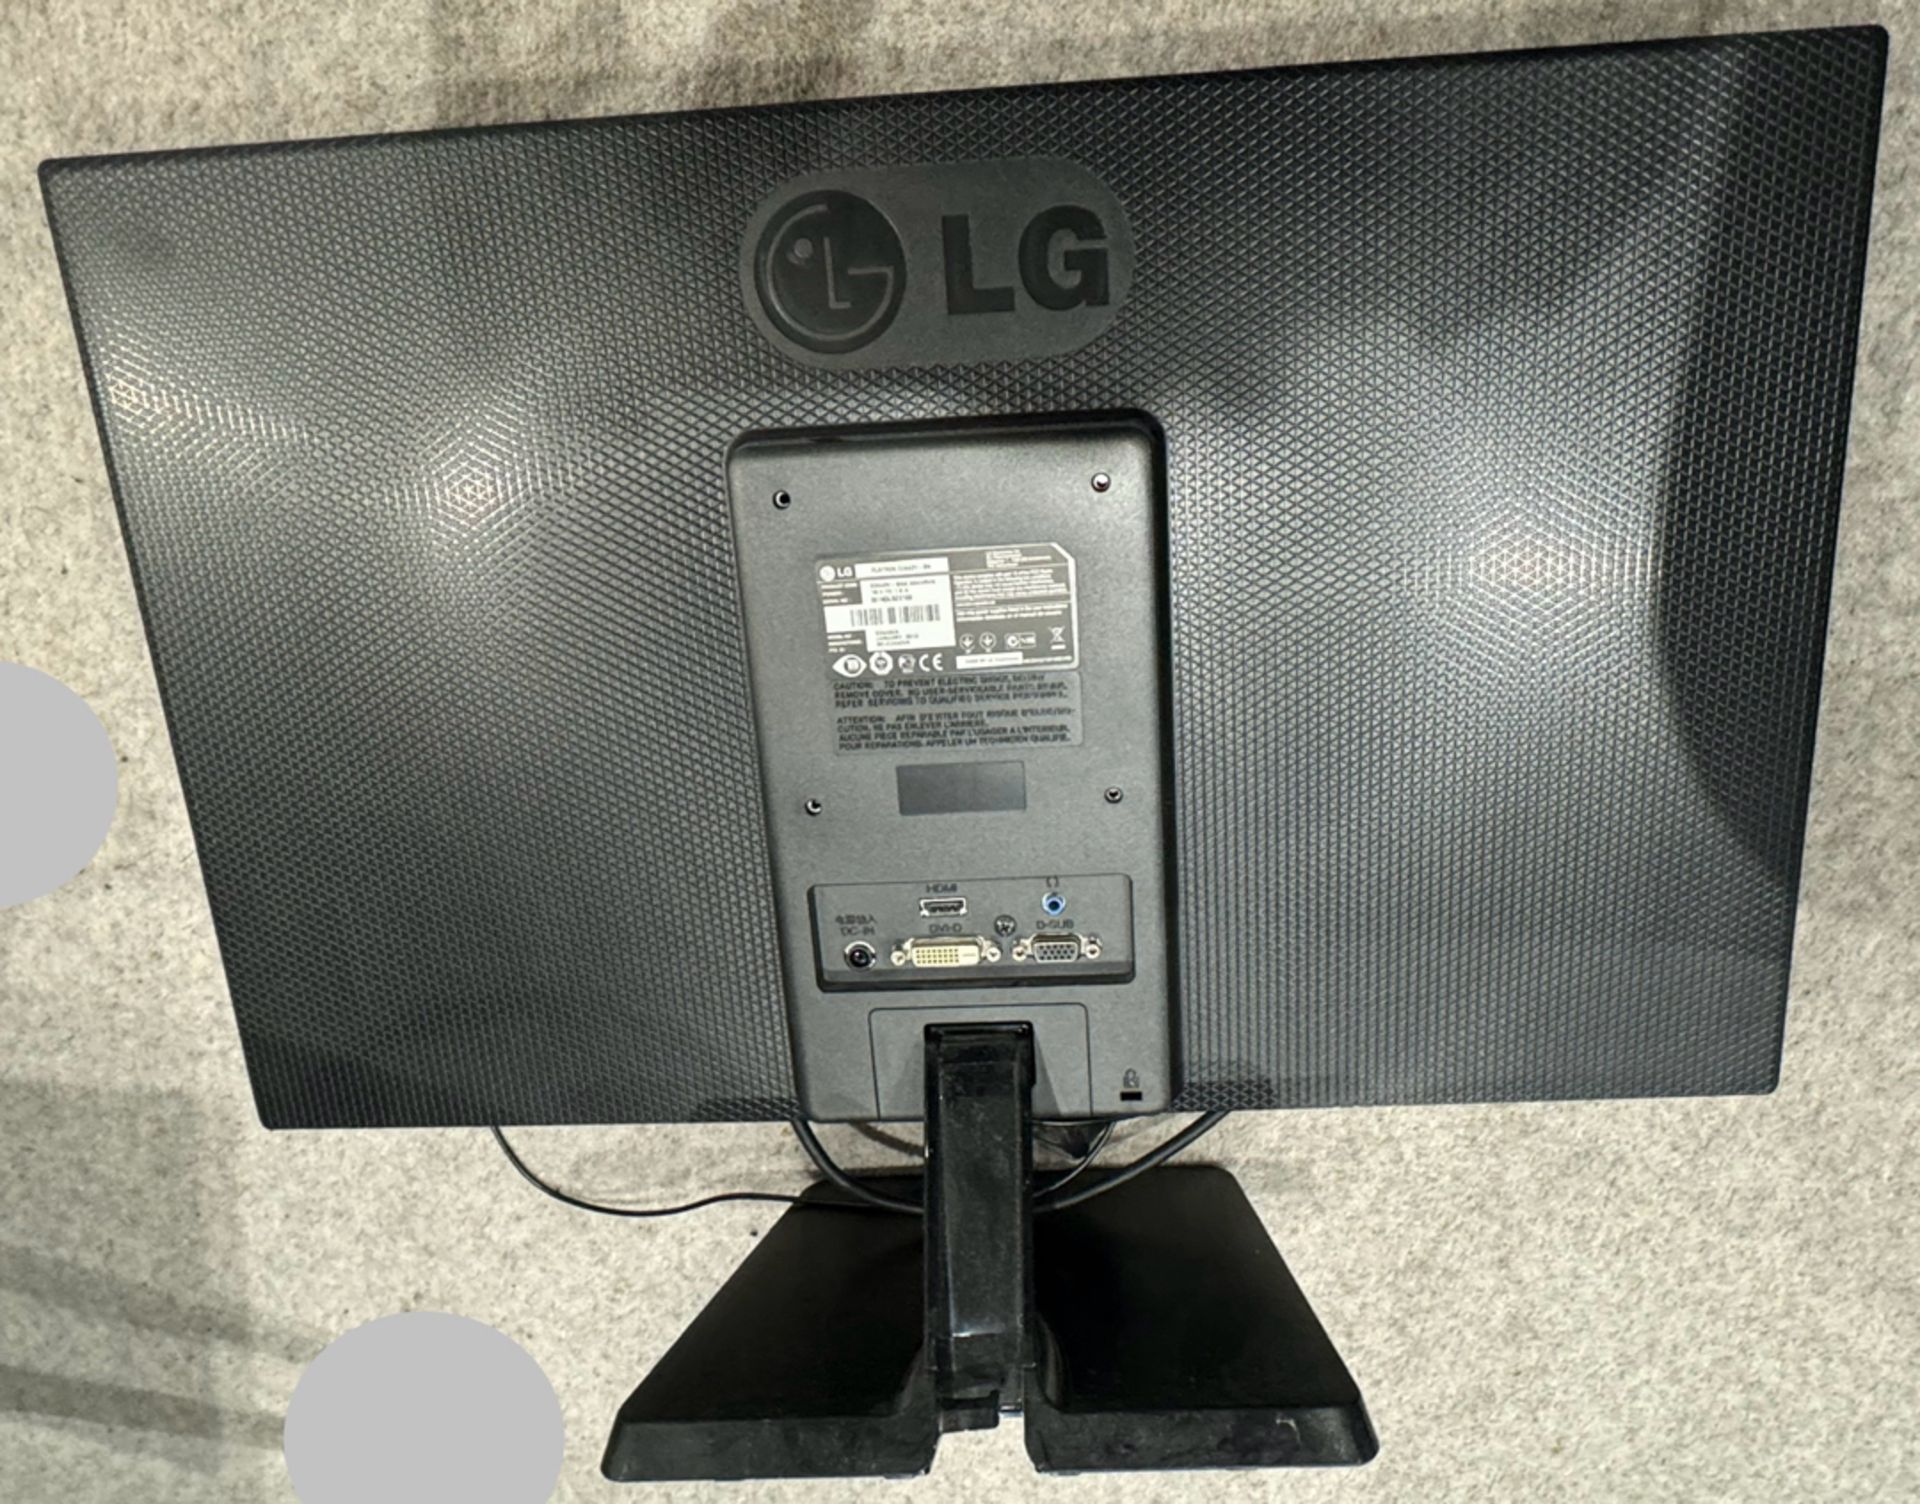 LG Flatron E2442V-BN 24" Full HD Monitor Screen with HDMI and Stand - Image 2 of 4